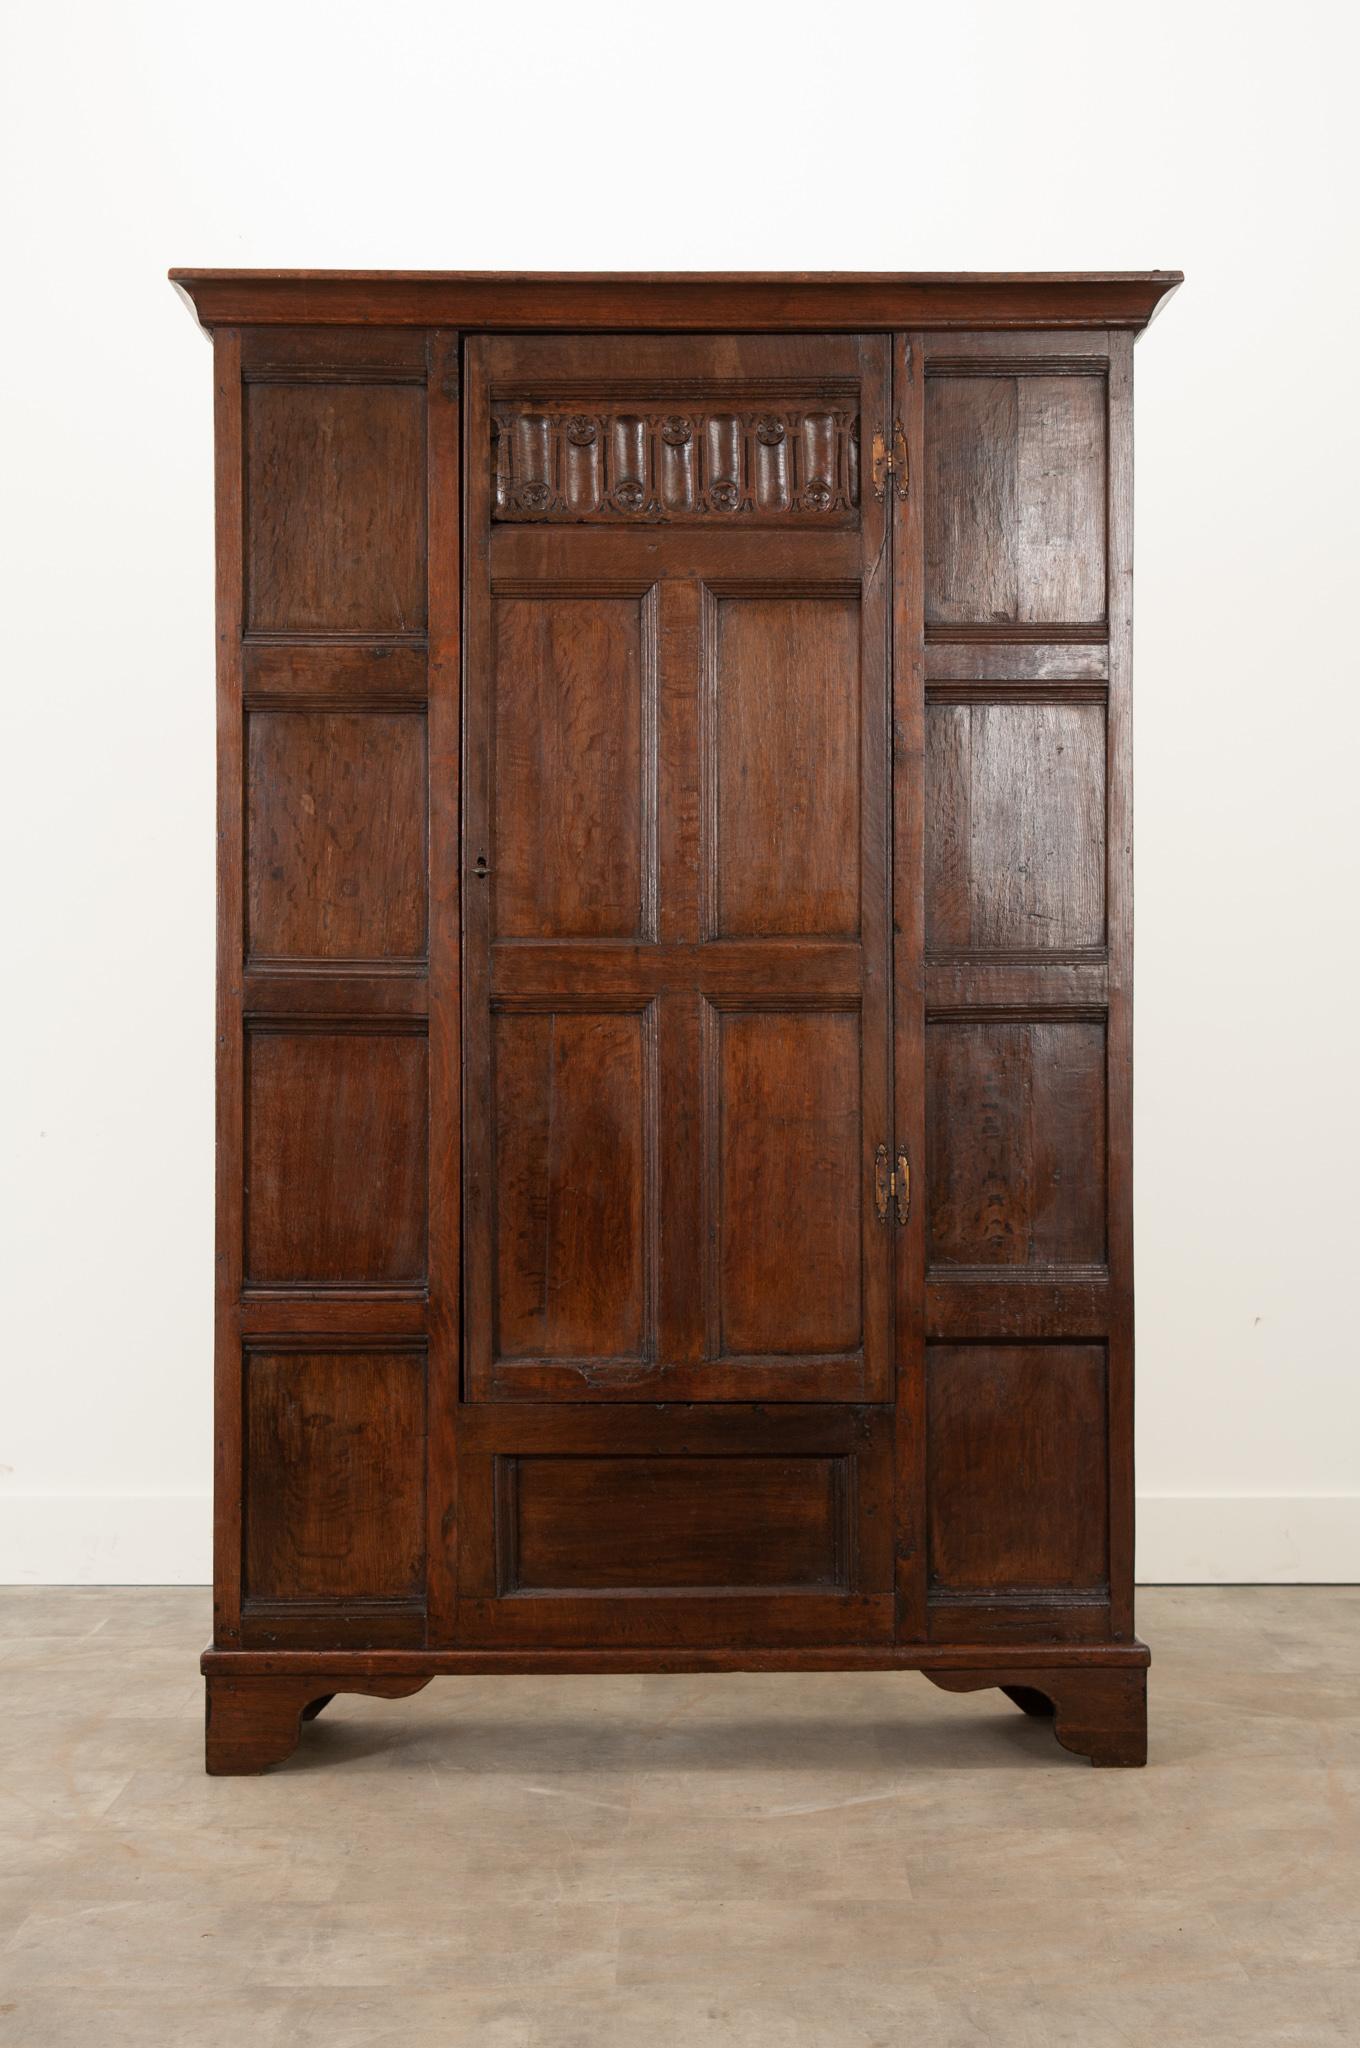 This wonderfully carved solid oak cabinet was crafted in the 1700s with style and functionality in mind. Thumbnail molded paneling on the front and sides give it fantastic depth. The door is carved with four panels below a rosette motif inspired by